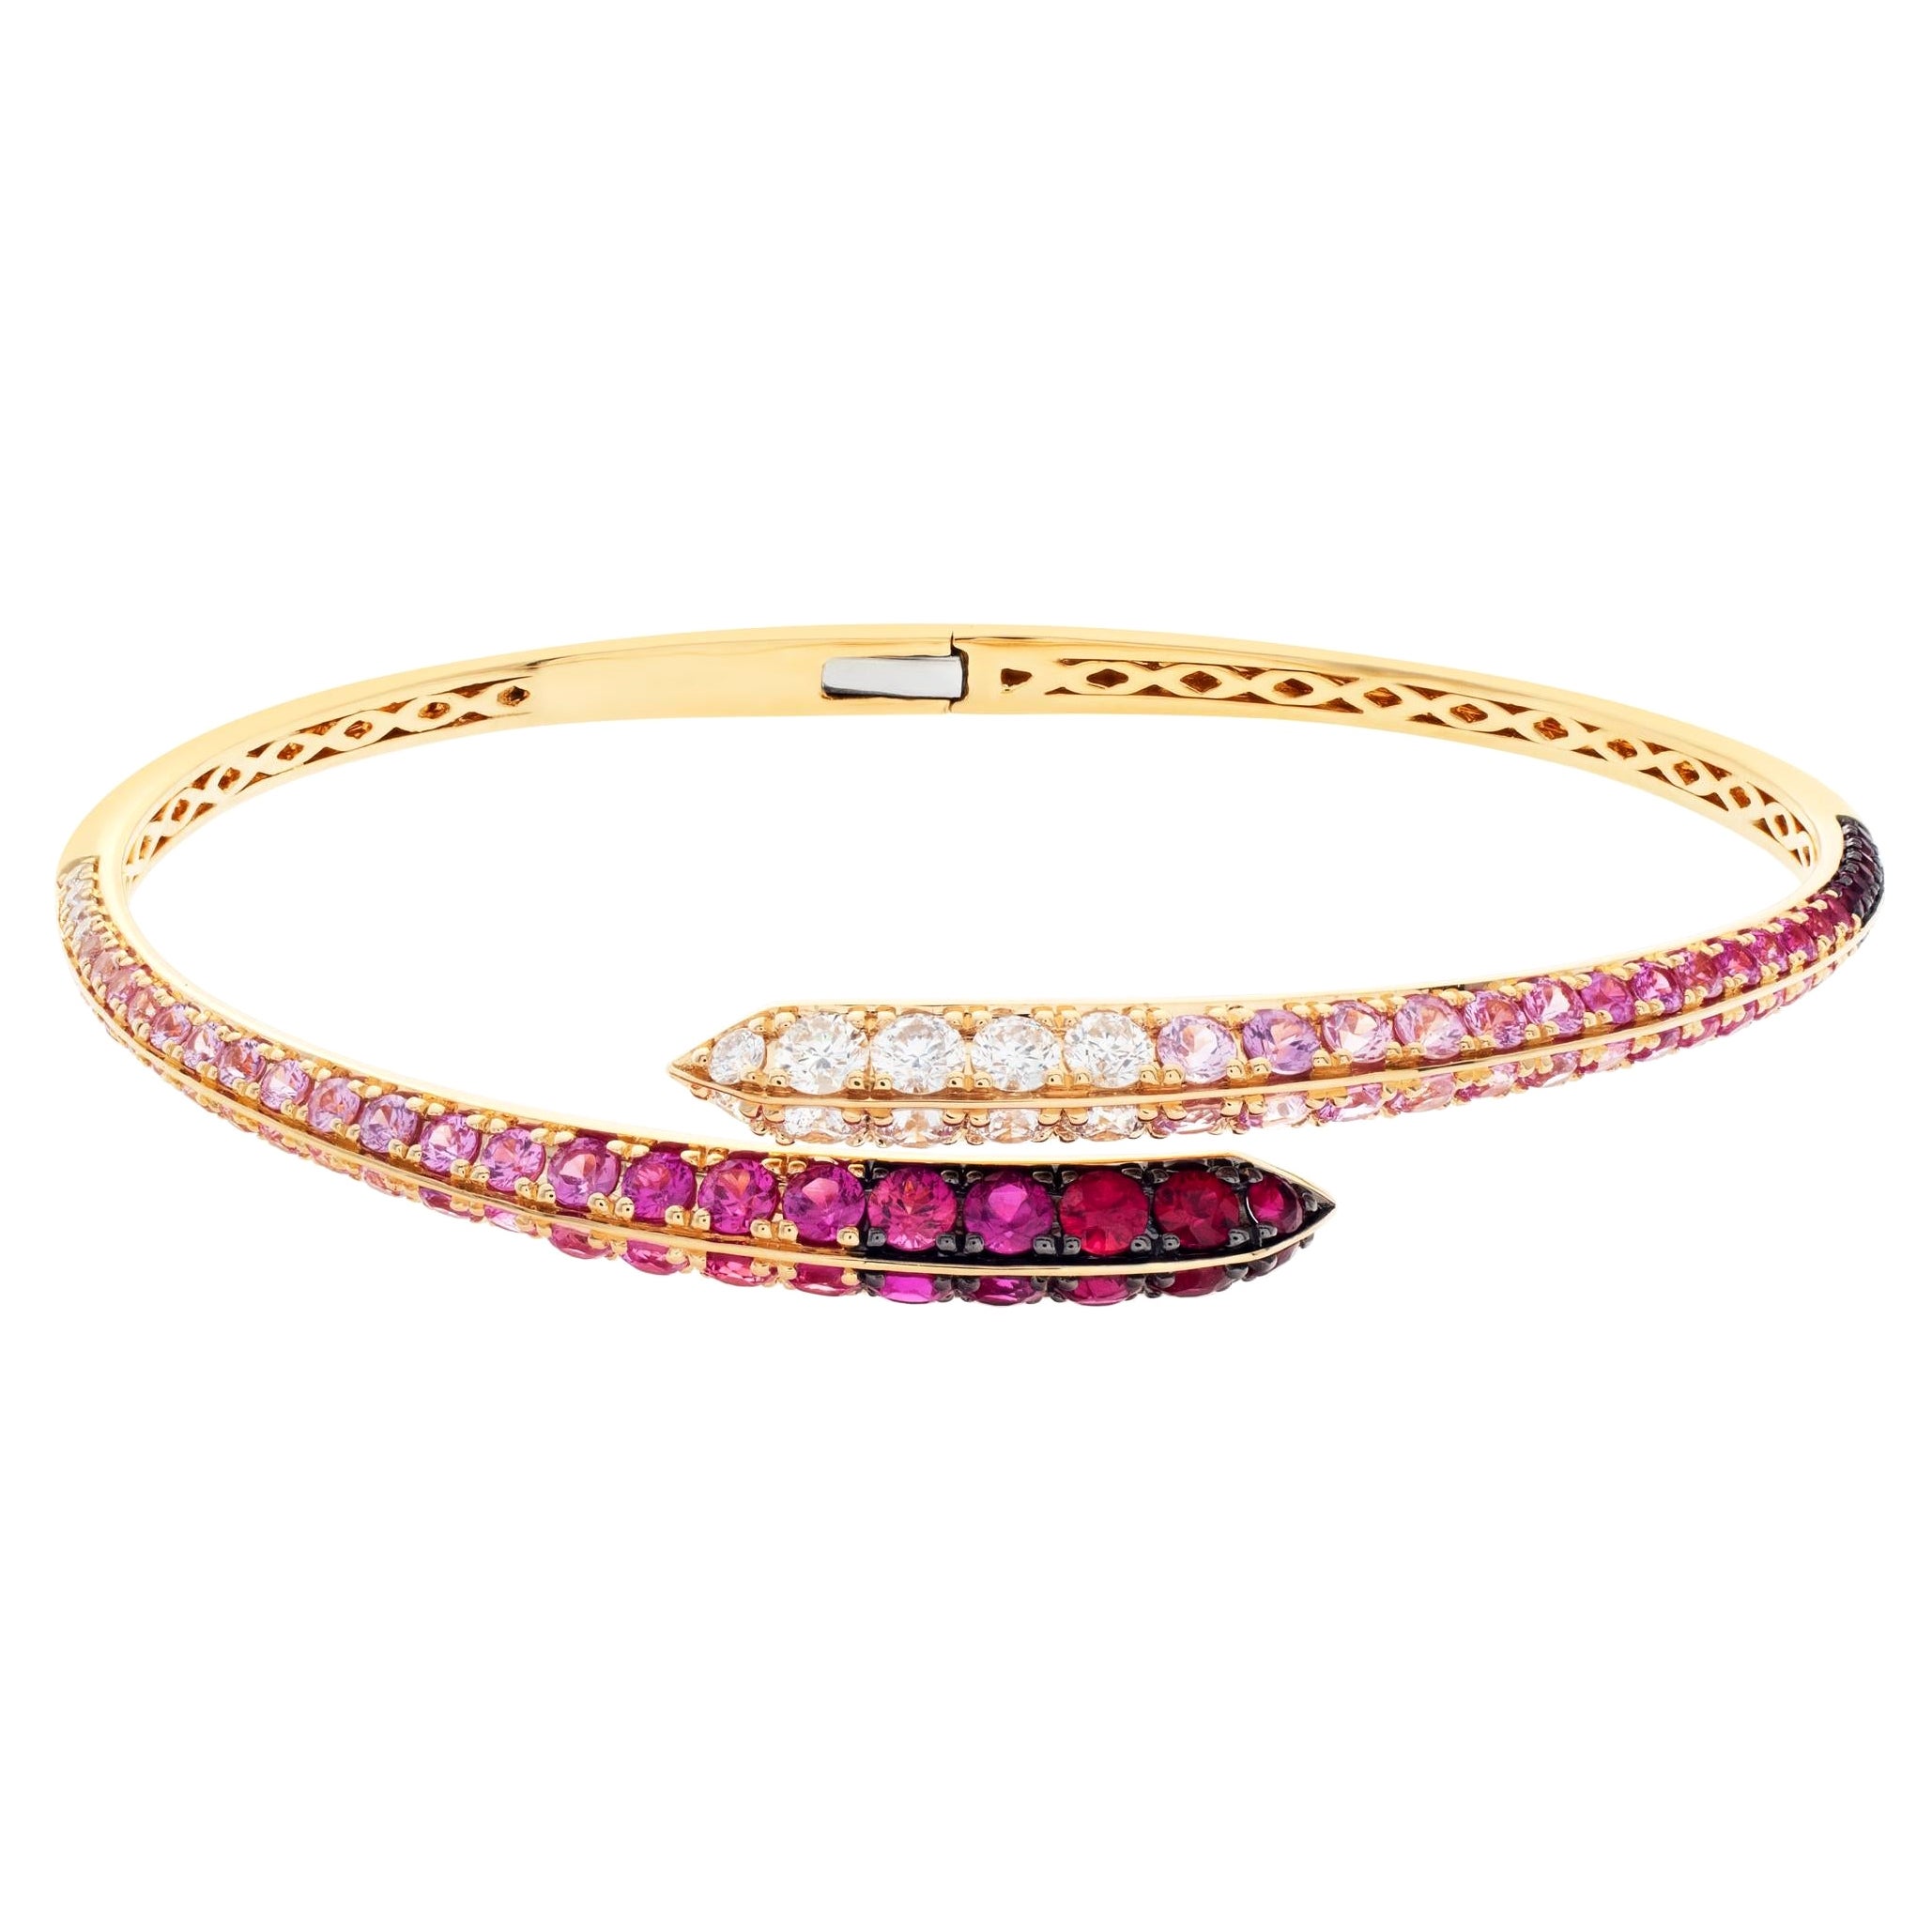 Gradient Pink Sapphires, Ruby and Diamond Hinged Bangle Set in 18k Yellow Gold